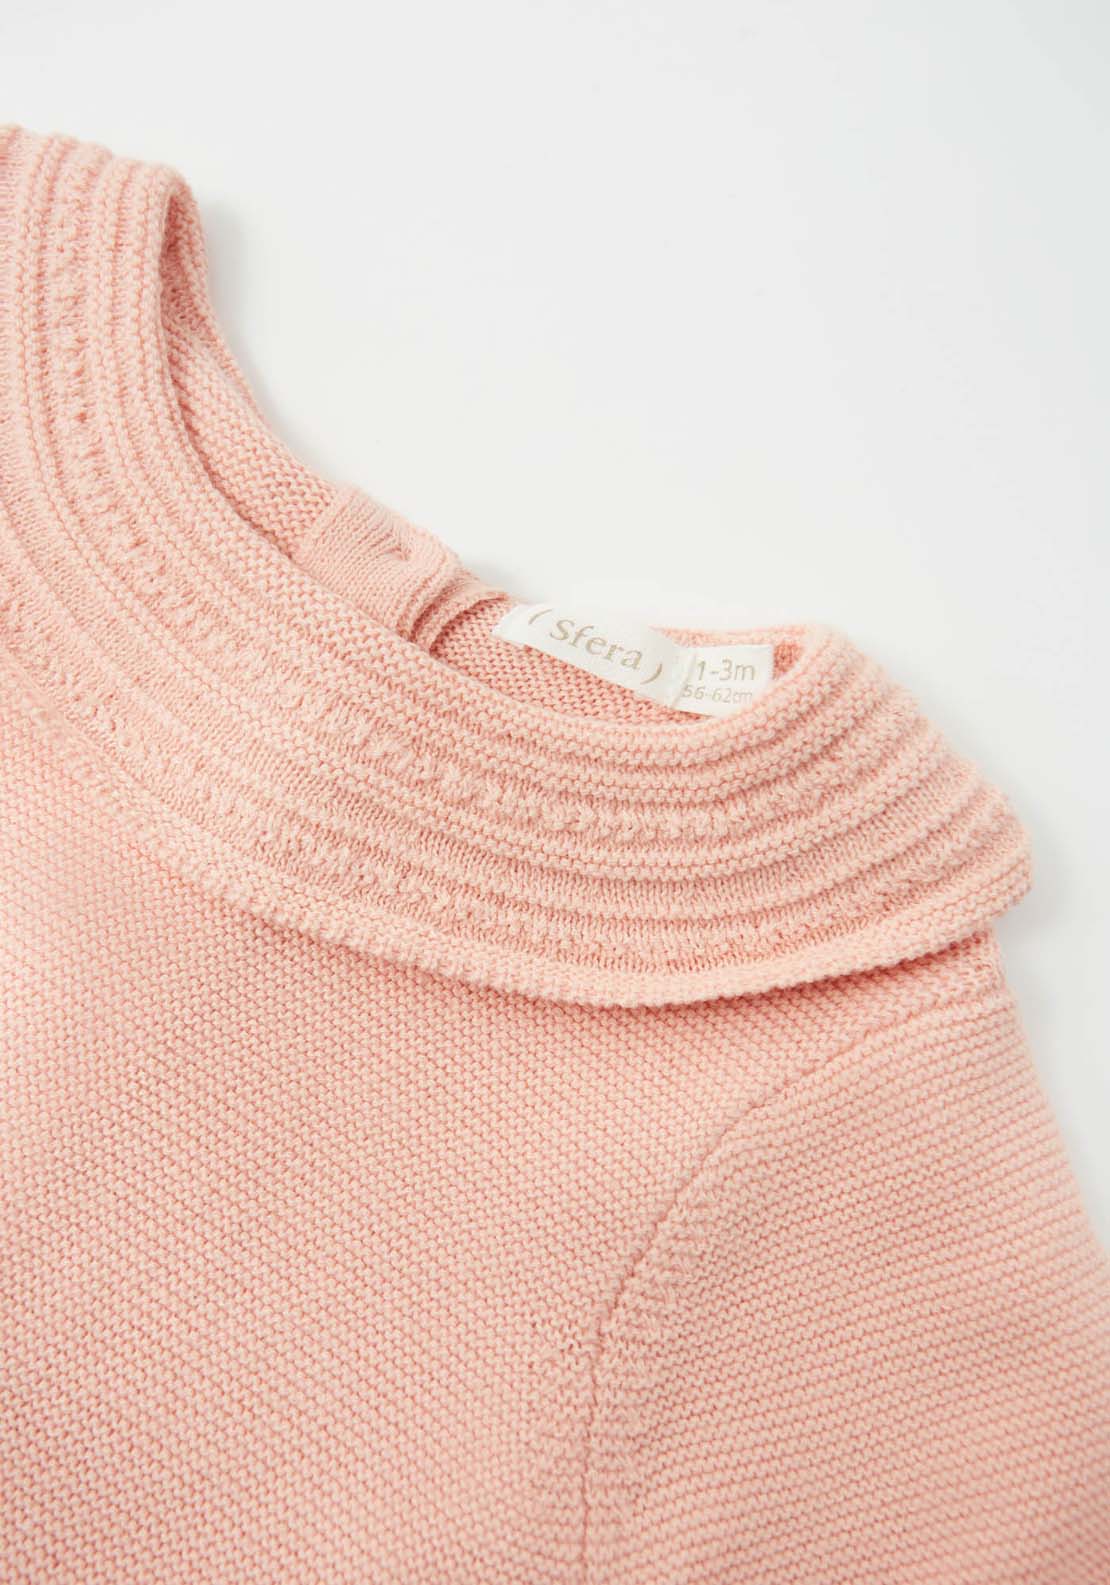 Sfera Ruffle Neck Knit Top - Pink 3 Shaws Department Stores